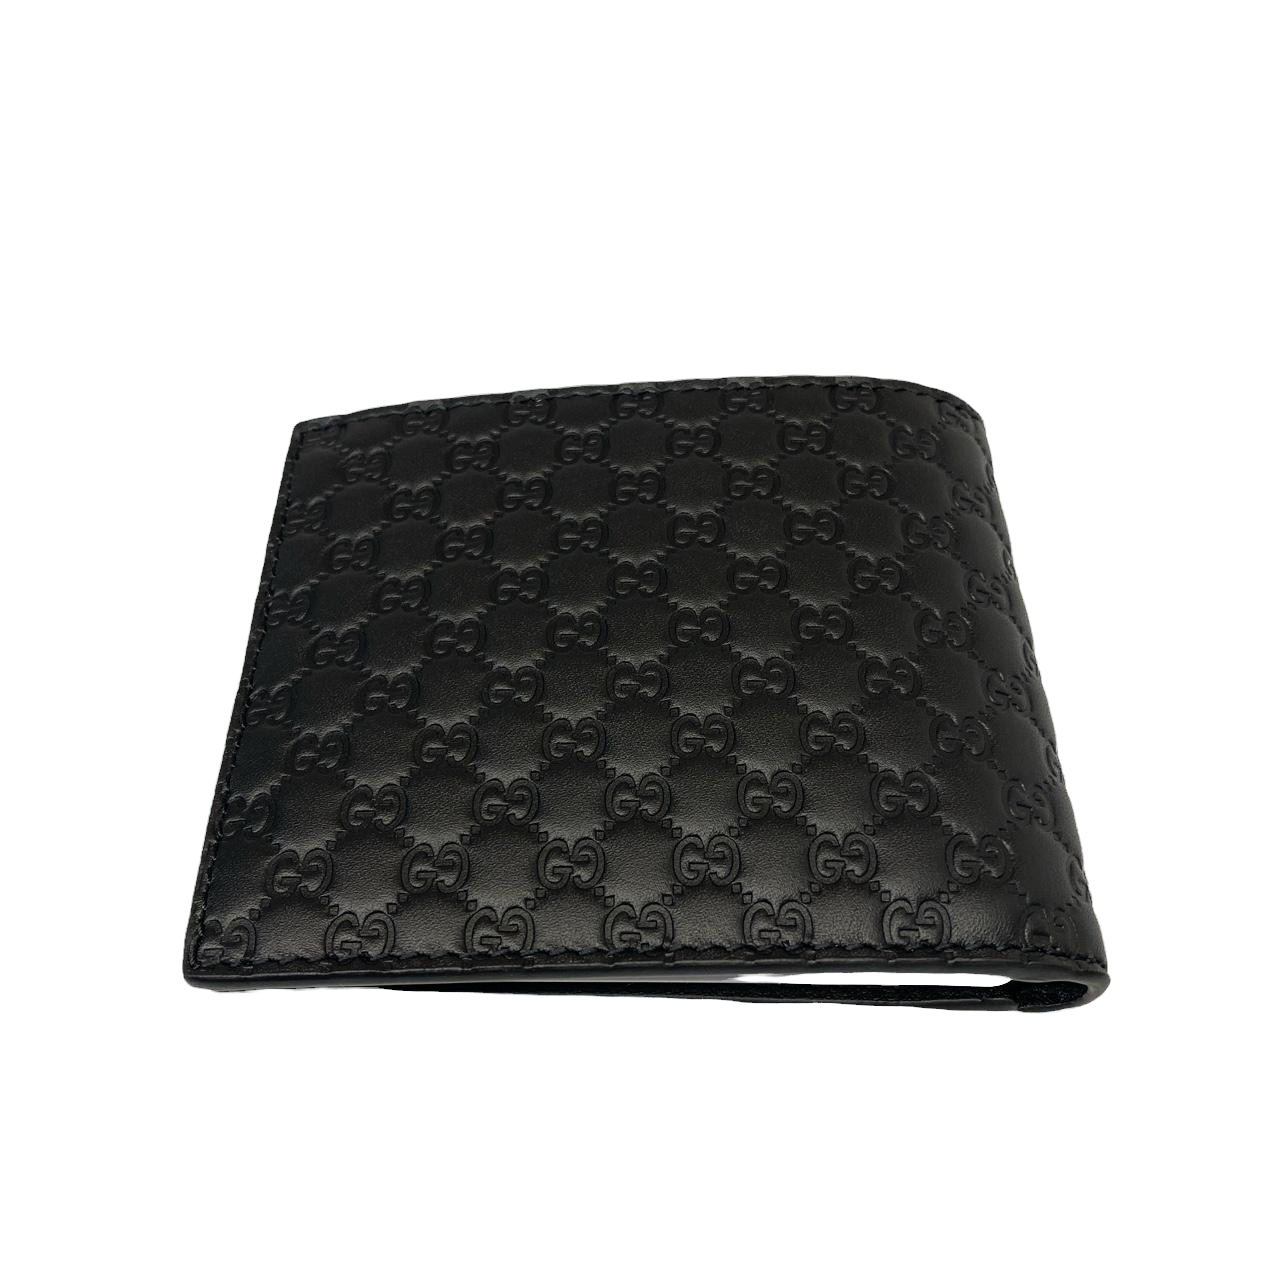 Gucci GG Signature Leather Bifold Wallet - Black Wallets, Accessories -  GUC1295937